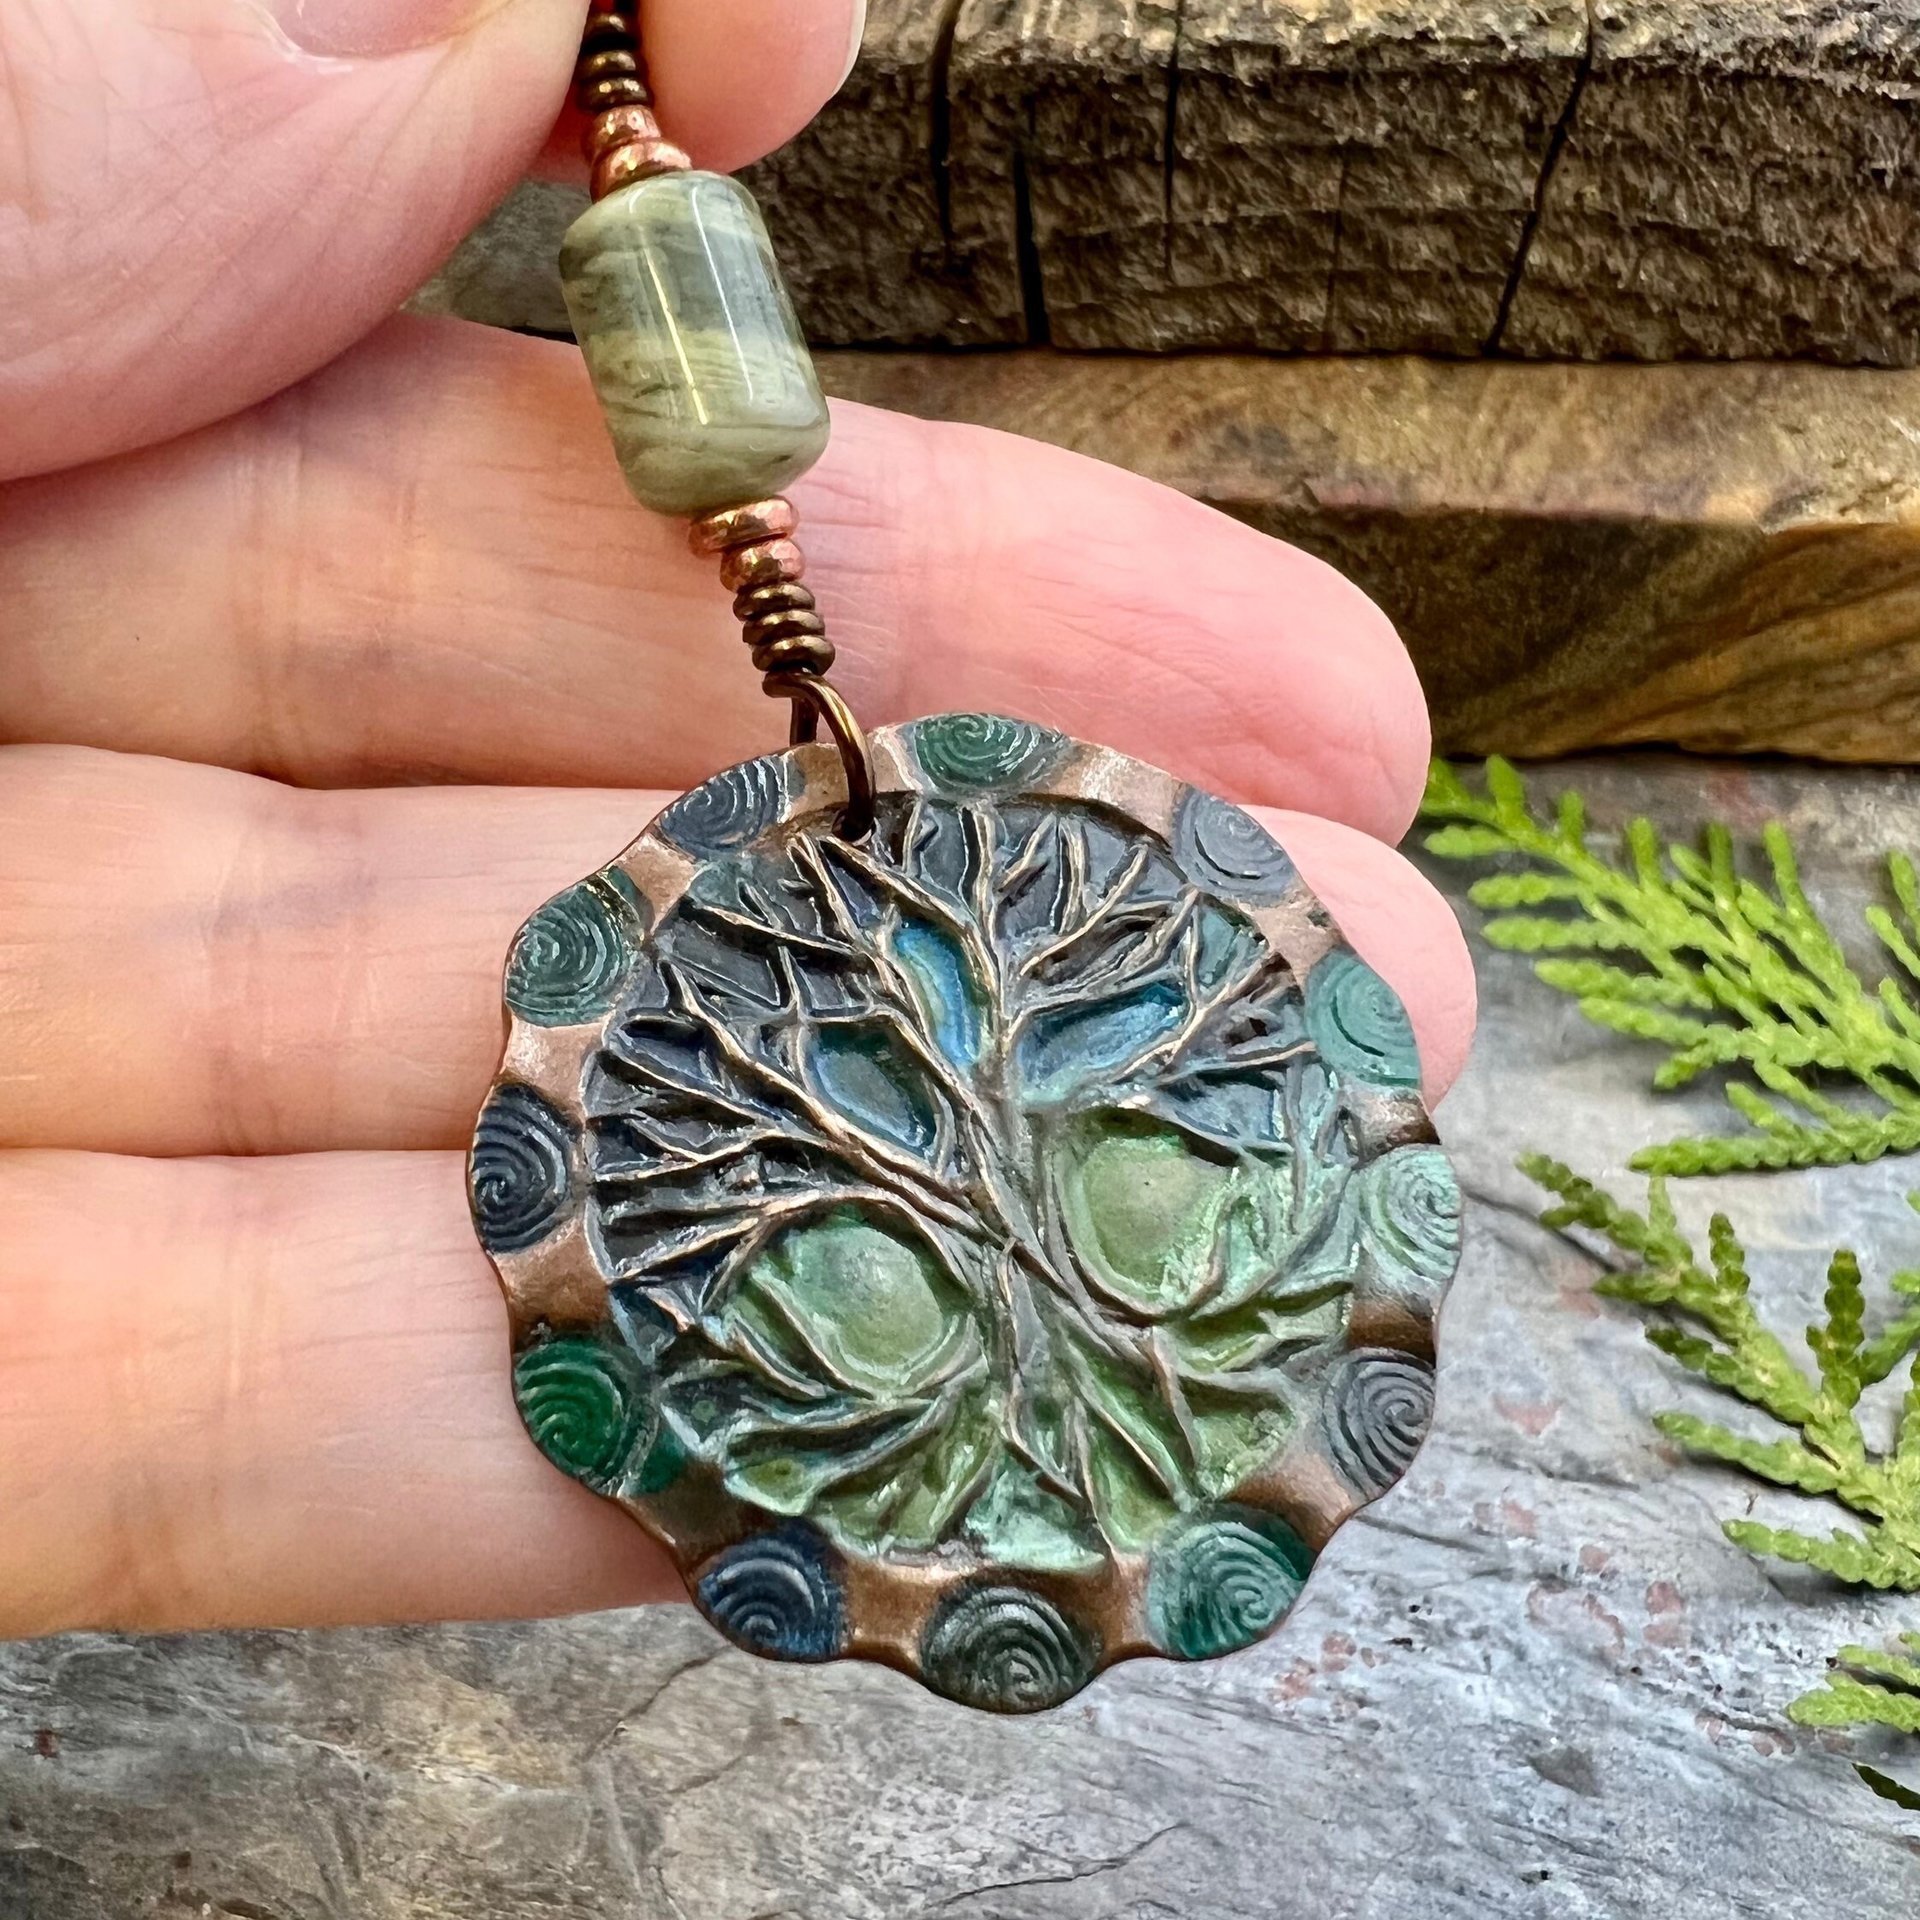 Tree of Life Pendant, Copper Colorful Patina, Connemara Marble, Hand Carved, Irish Celtic Spirals, Celtic Witch Goddess, Ancient Earthy Art